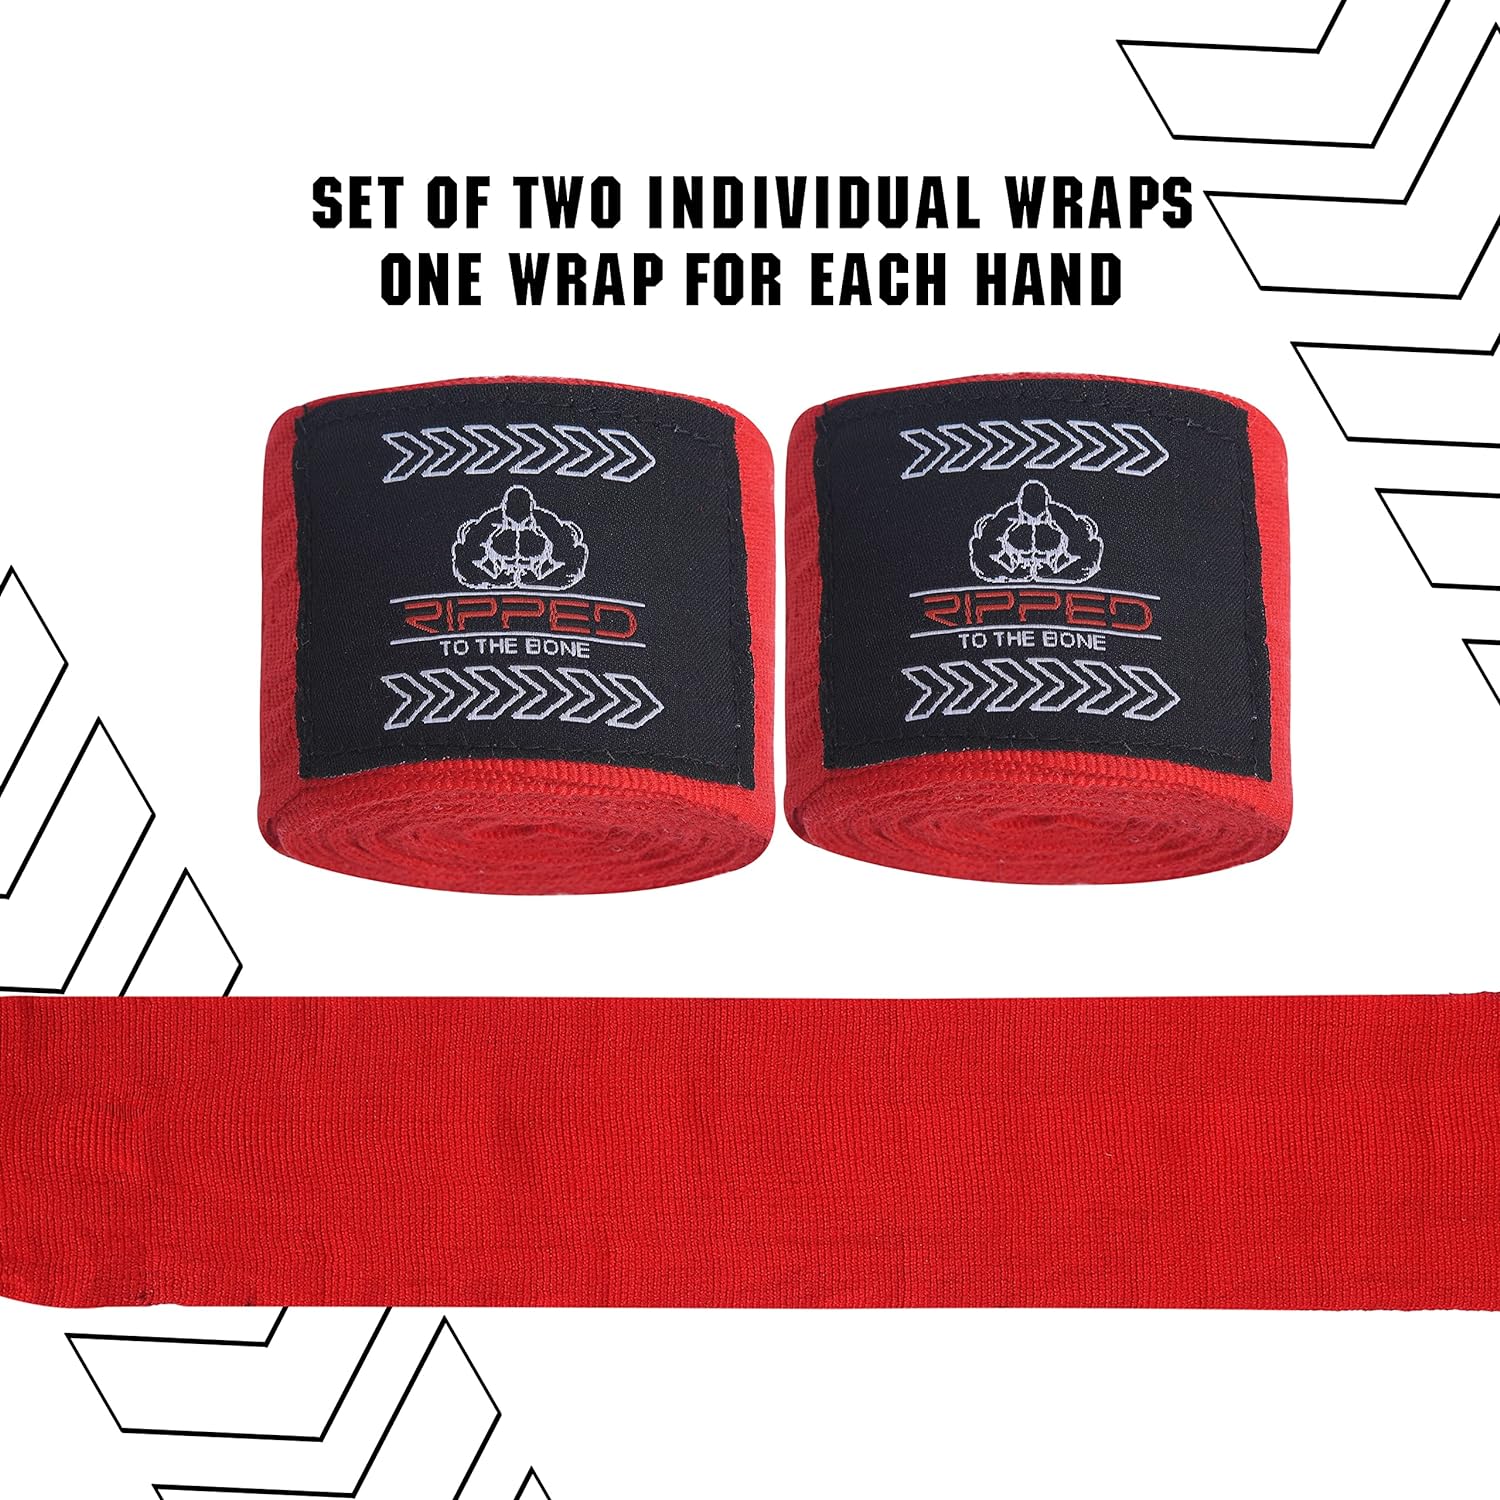 RTTB Premium Boxing Wraps (Pair) - 197" (5 Meter) Hand Wraps with Hook & Loop Closure: Ideal for Boxing, Kickboxing, Thai Boxing, MMA, Strength Training, Crossfit, Gym Workouts - Includes Case.